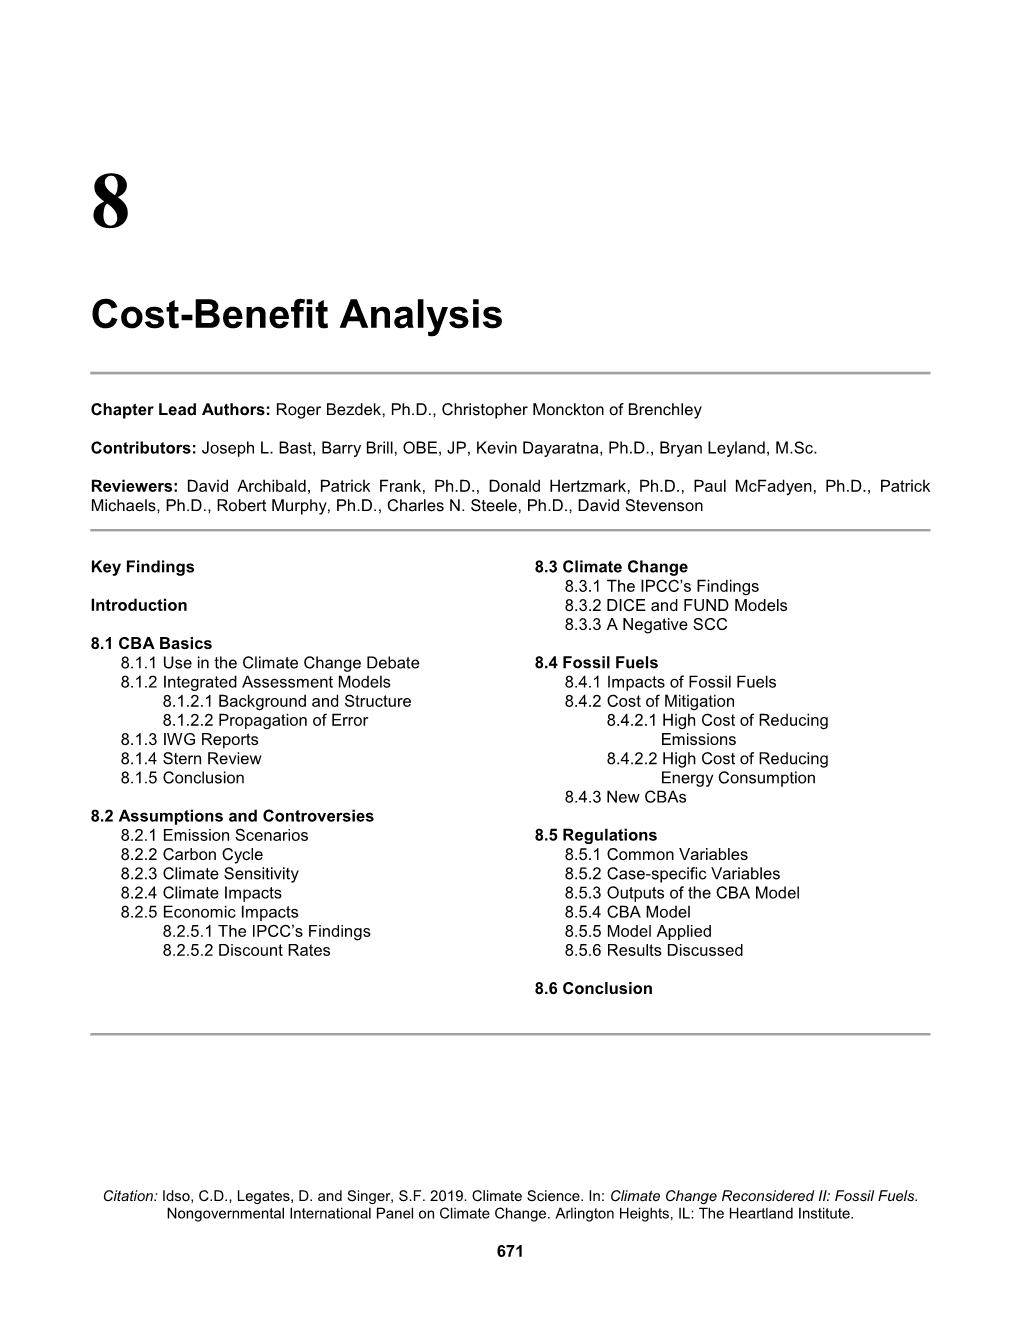 Cost-Benefit Analysis